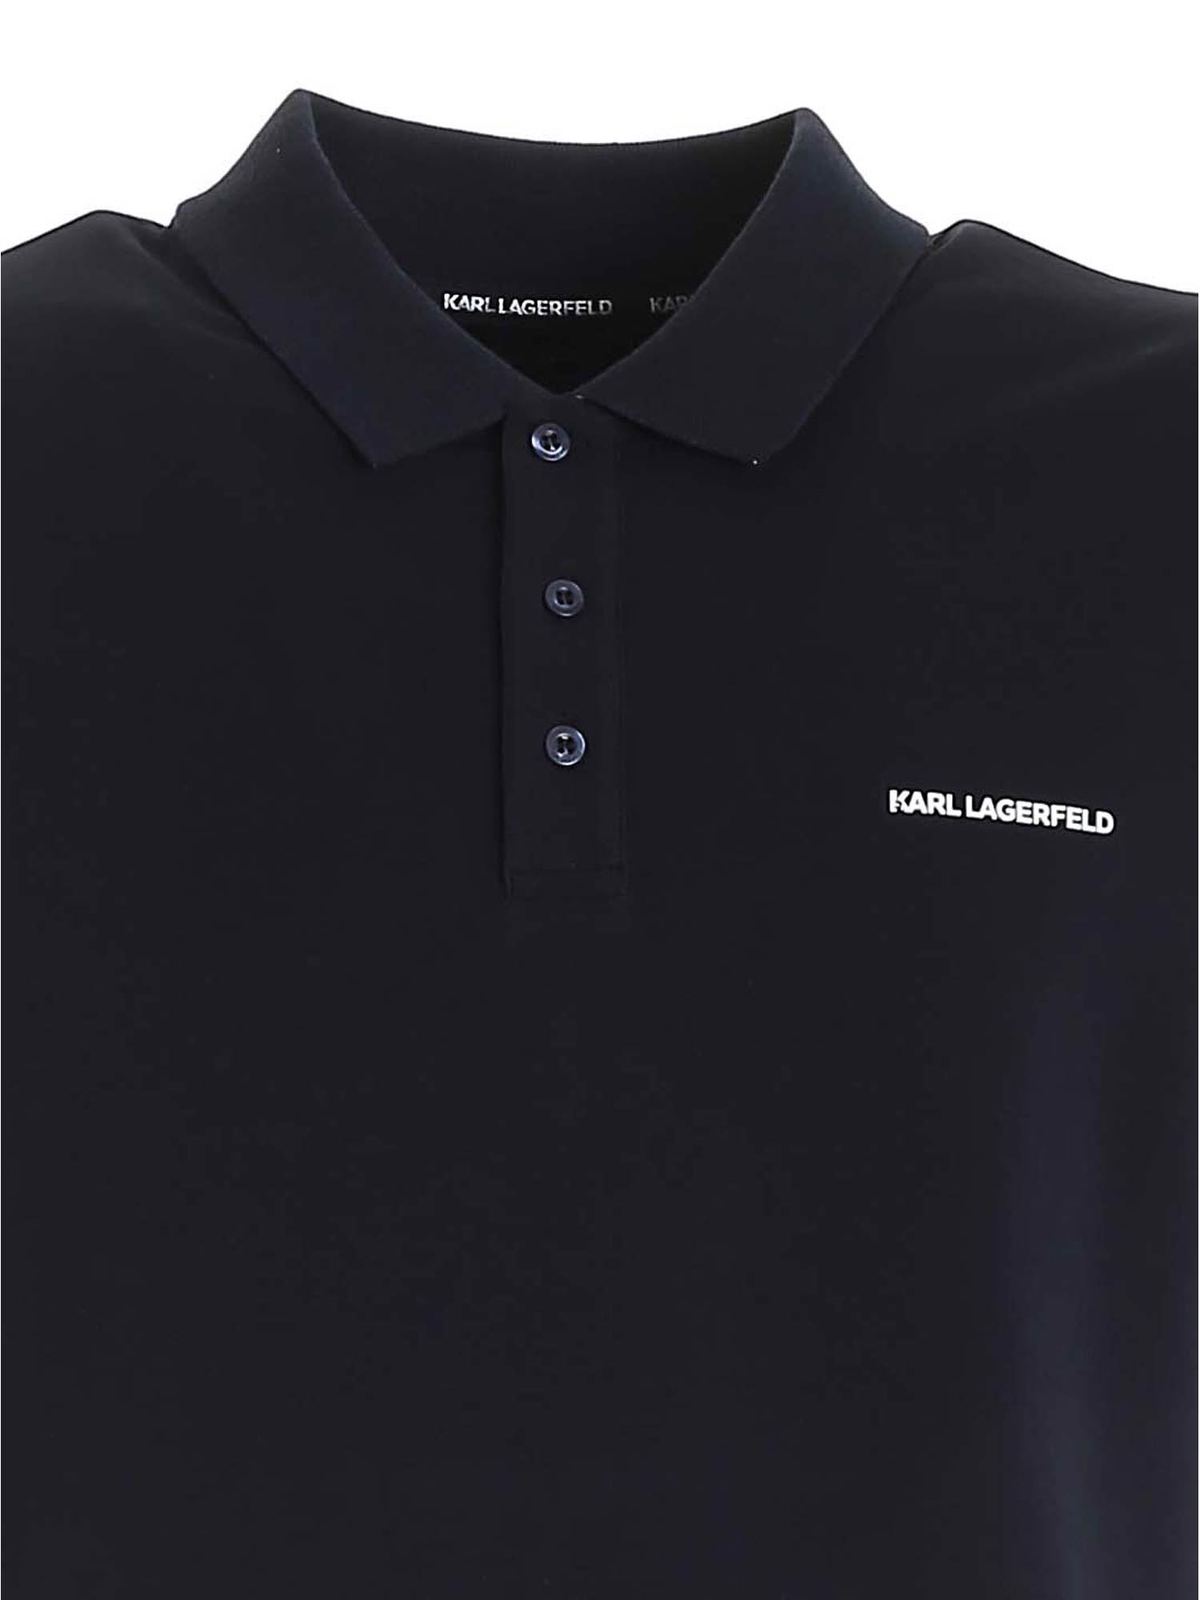 Buy > polo shirt karl lagerfeld > in stock